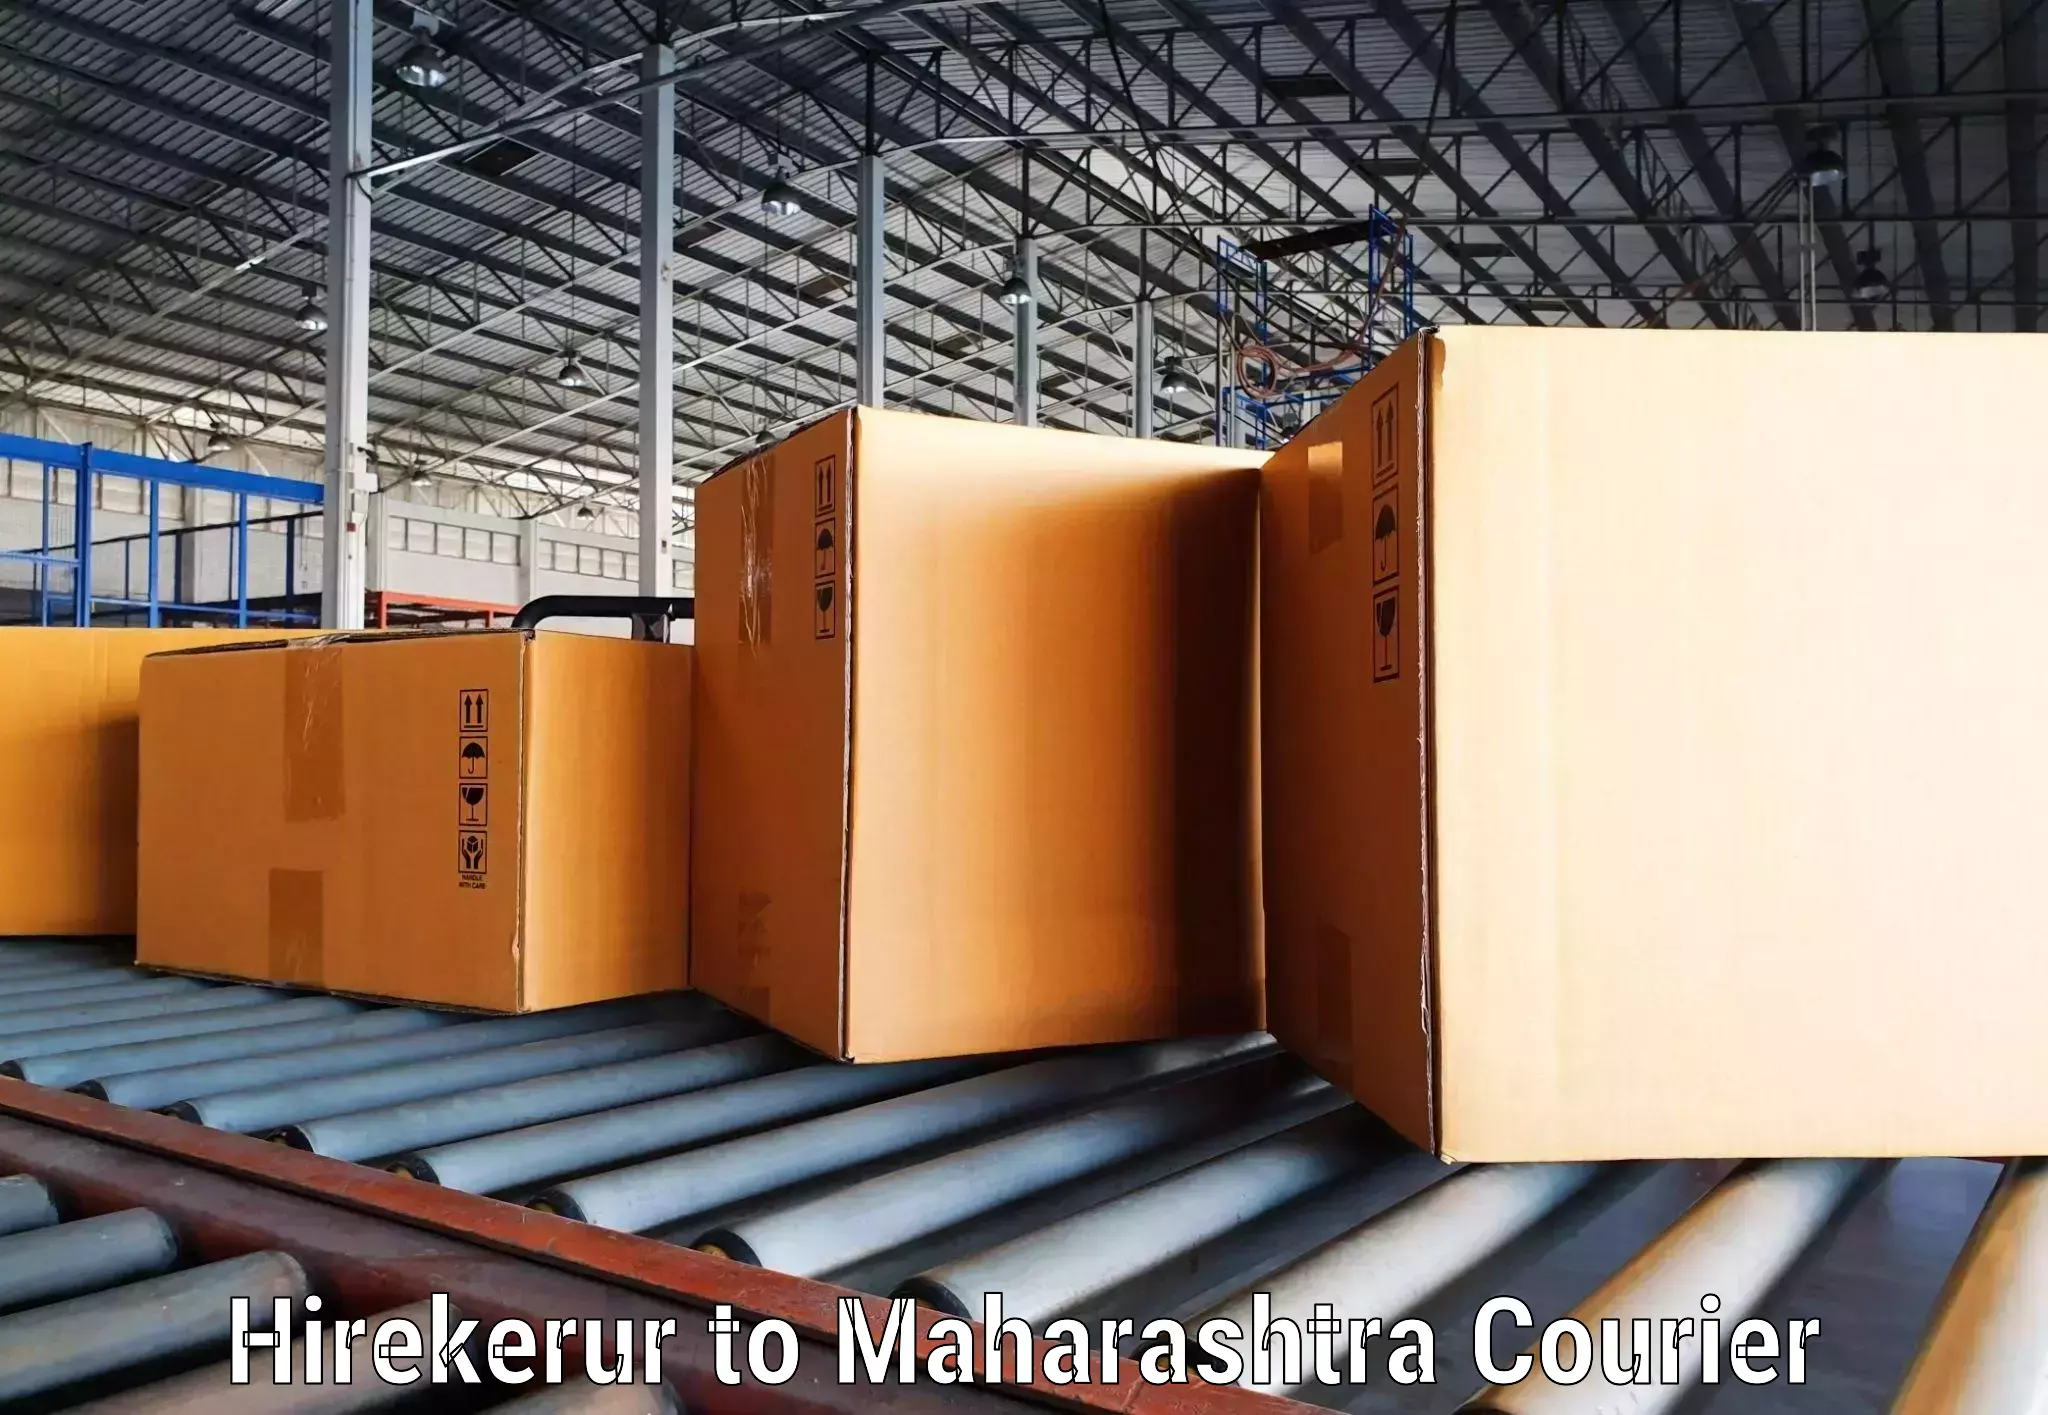 State-of-the-art courier technology Hirekerur to Maharashtra